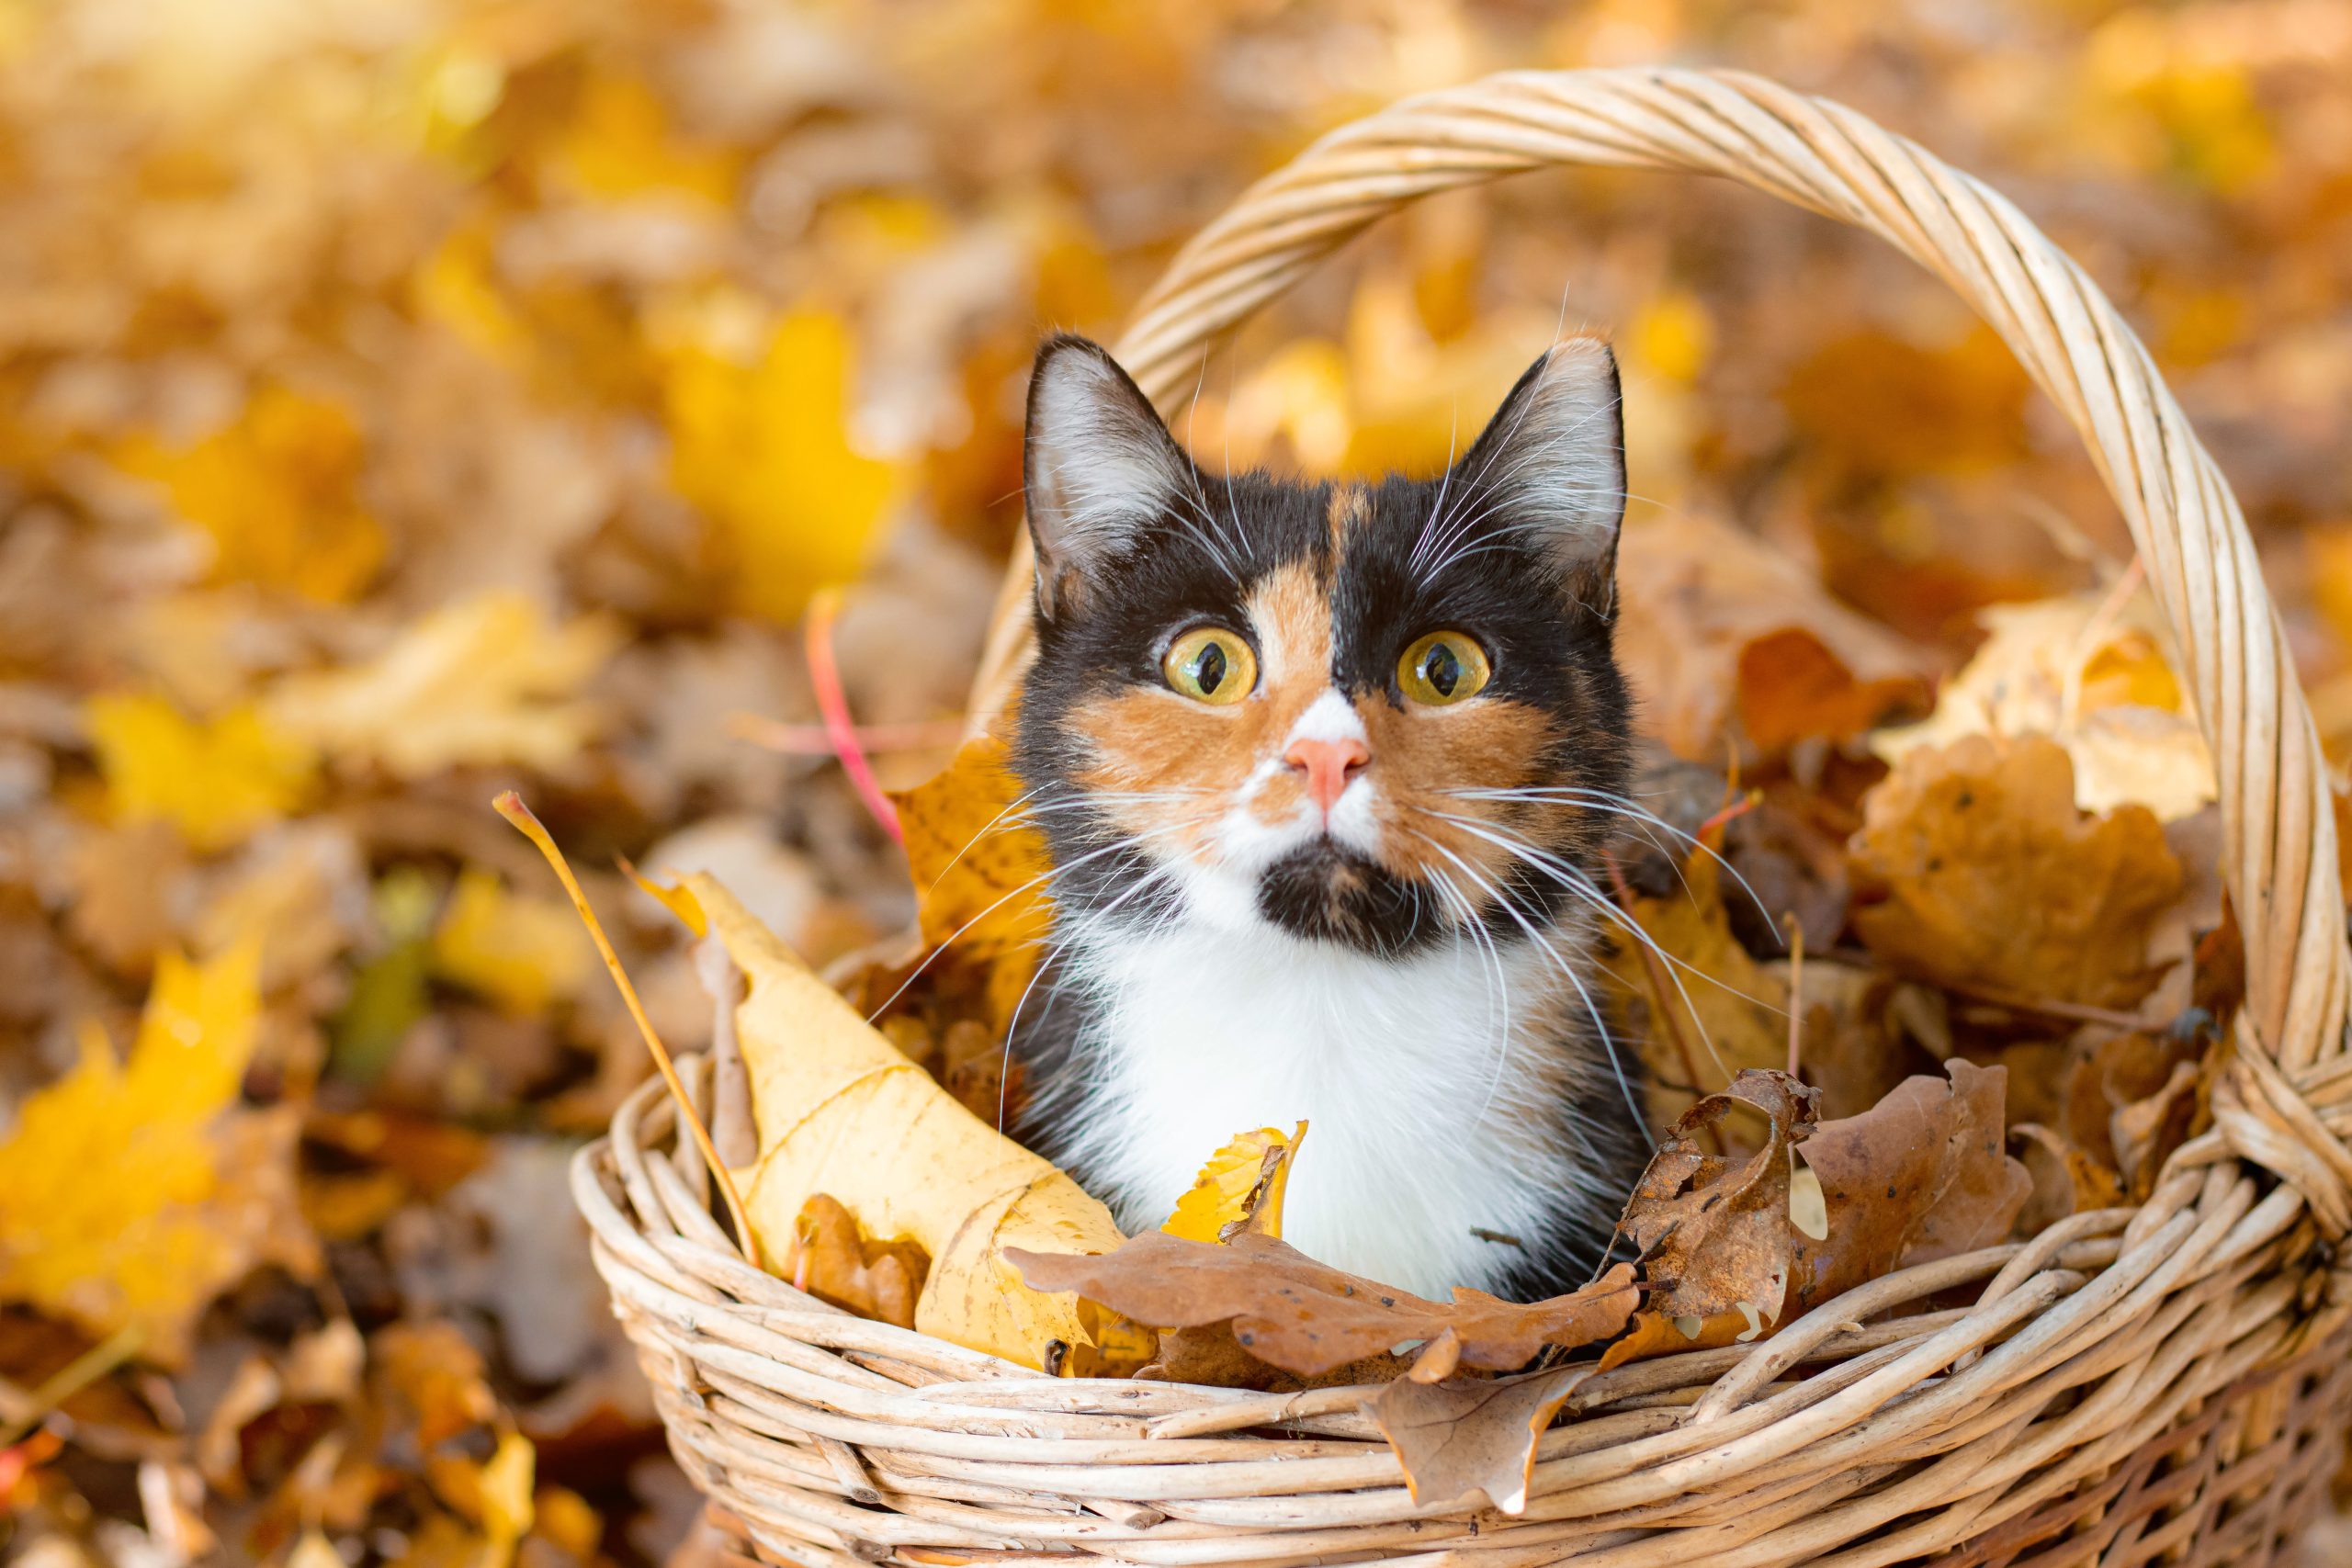 calico cat sitting in woven basket with fall leaves